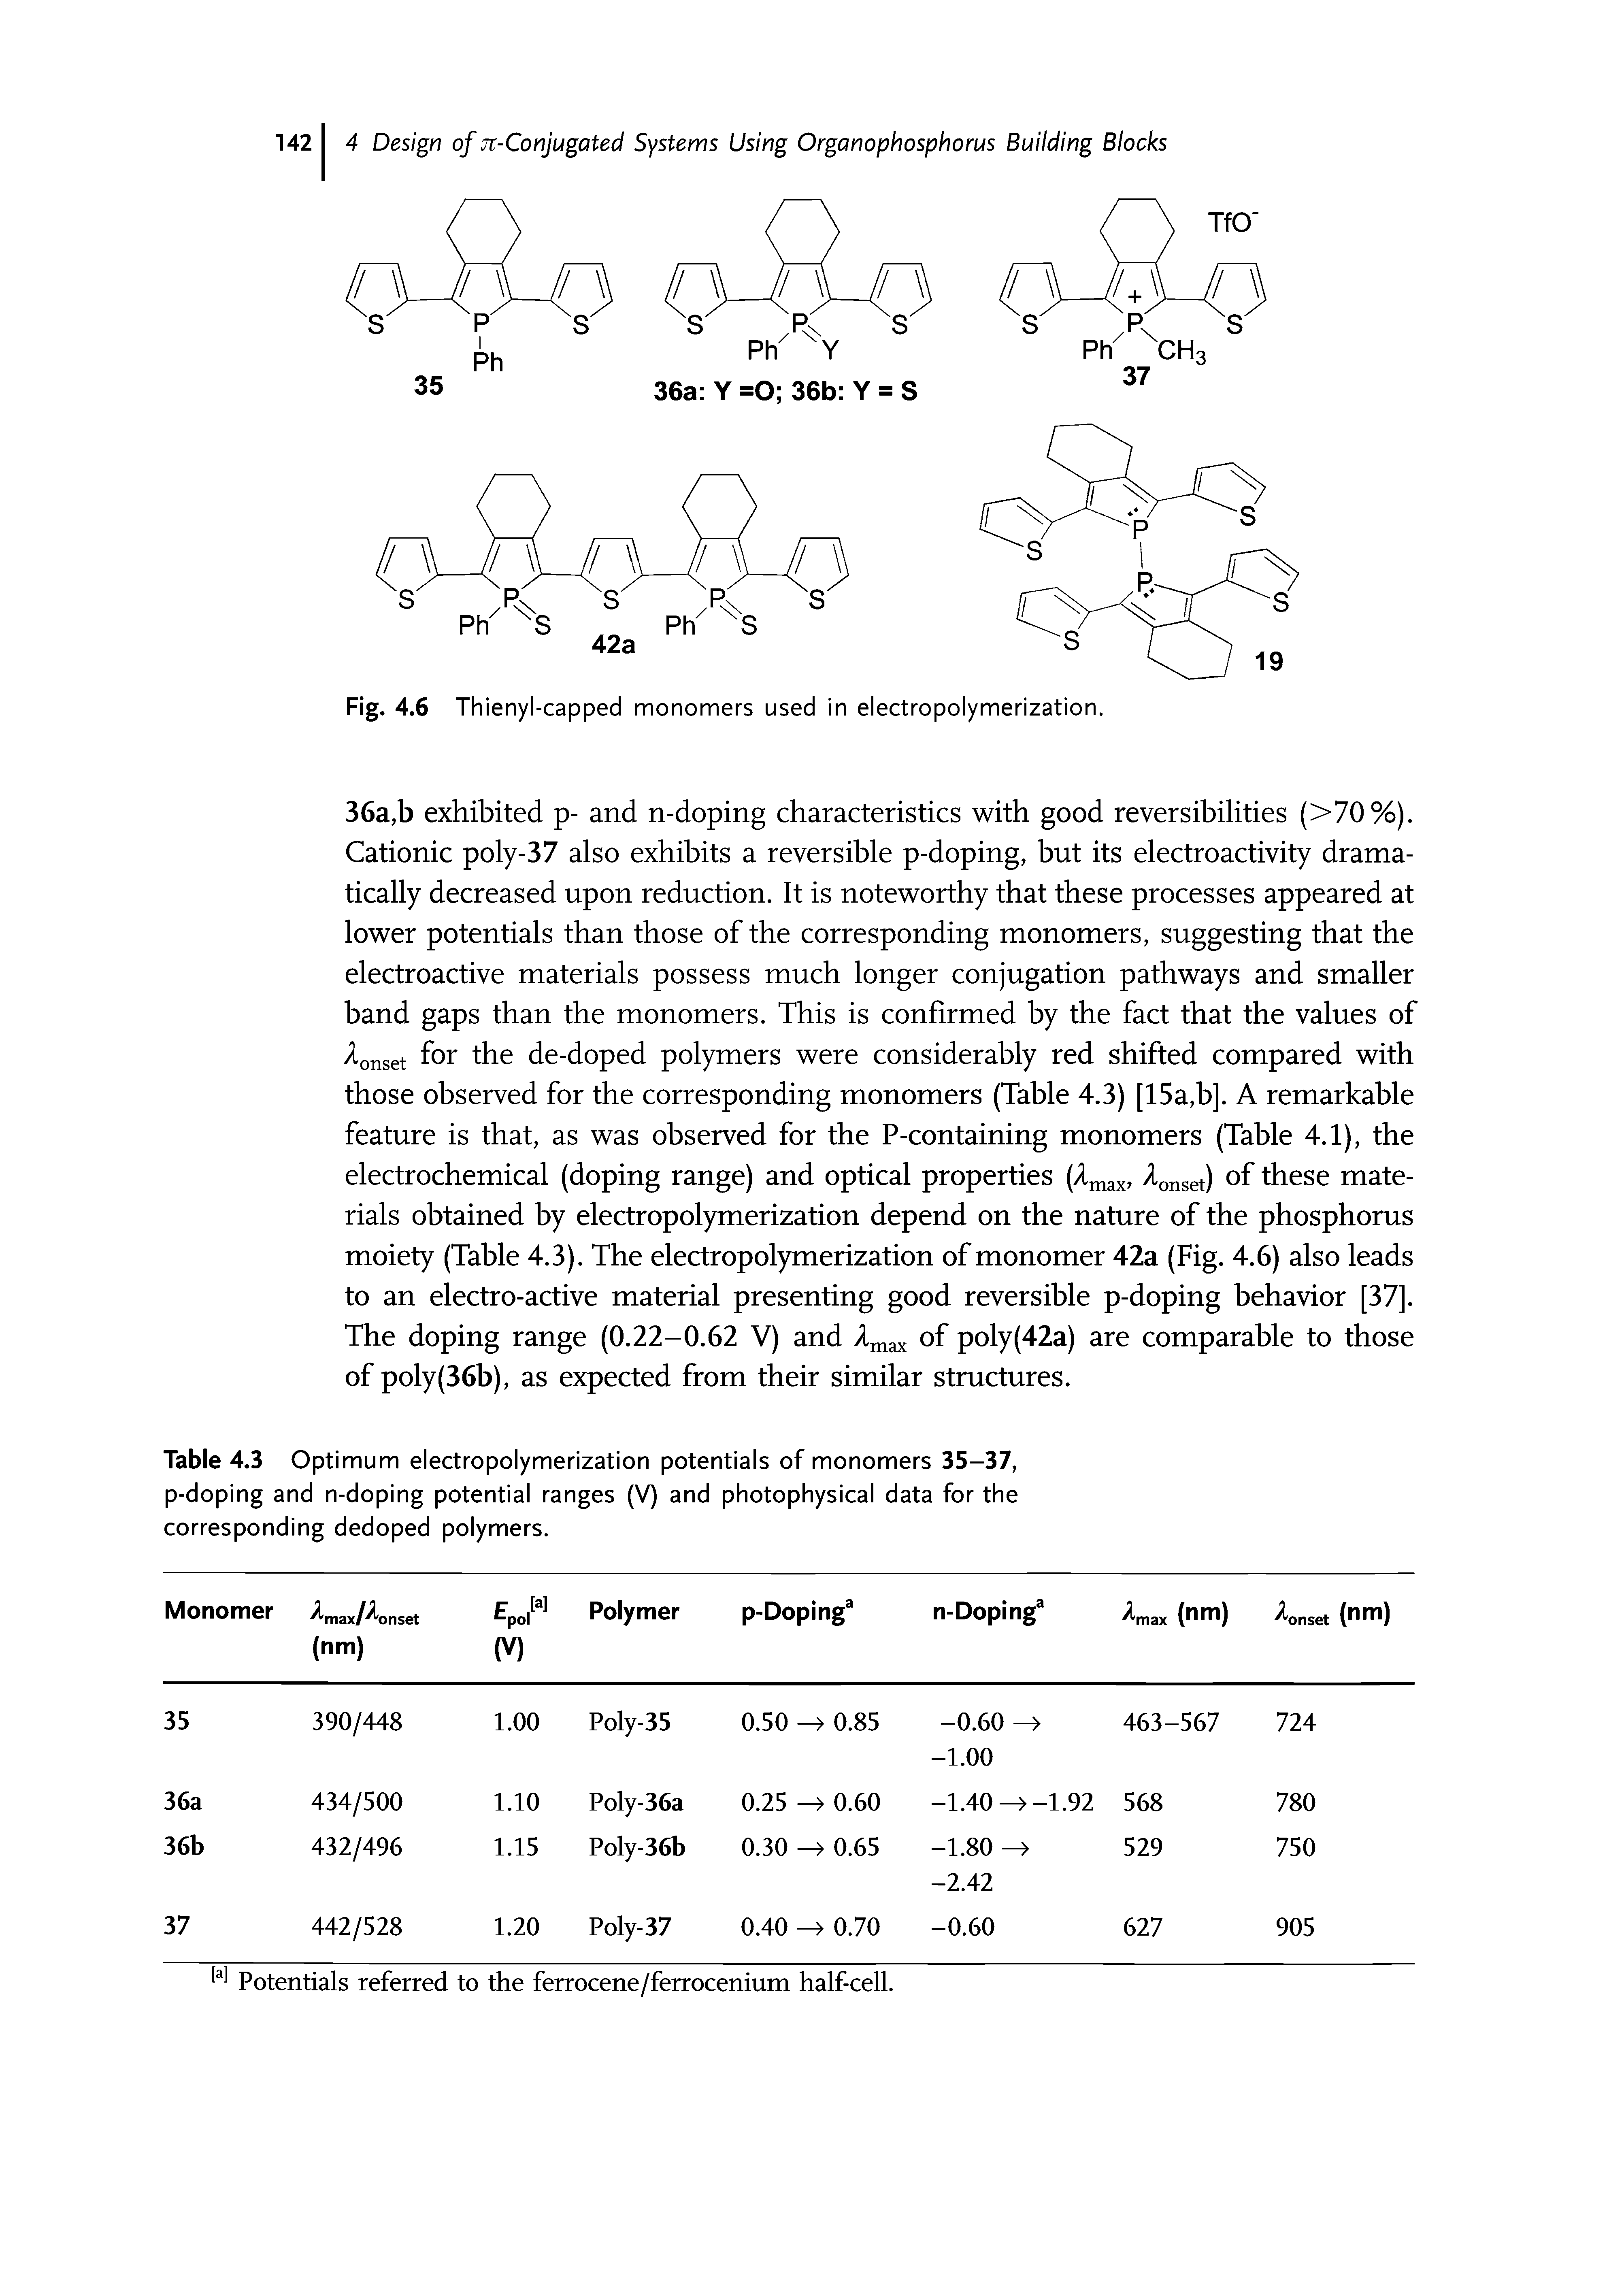 Table 4.3 Optimum electropolymerization potentials of monomers 35-37, p-doping and n-doping potential ranges (V) and photophysical data for the corresponding dedoped polymers.